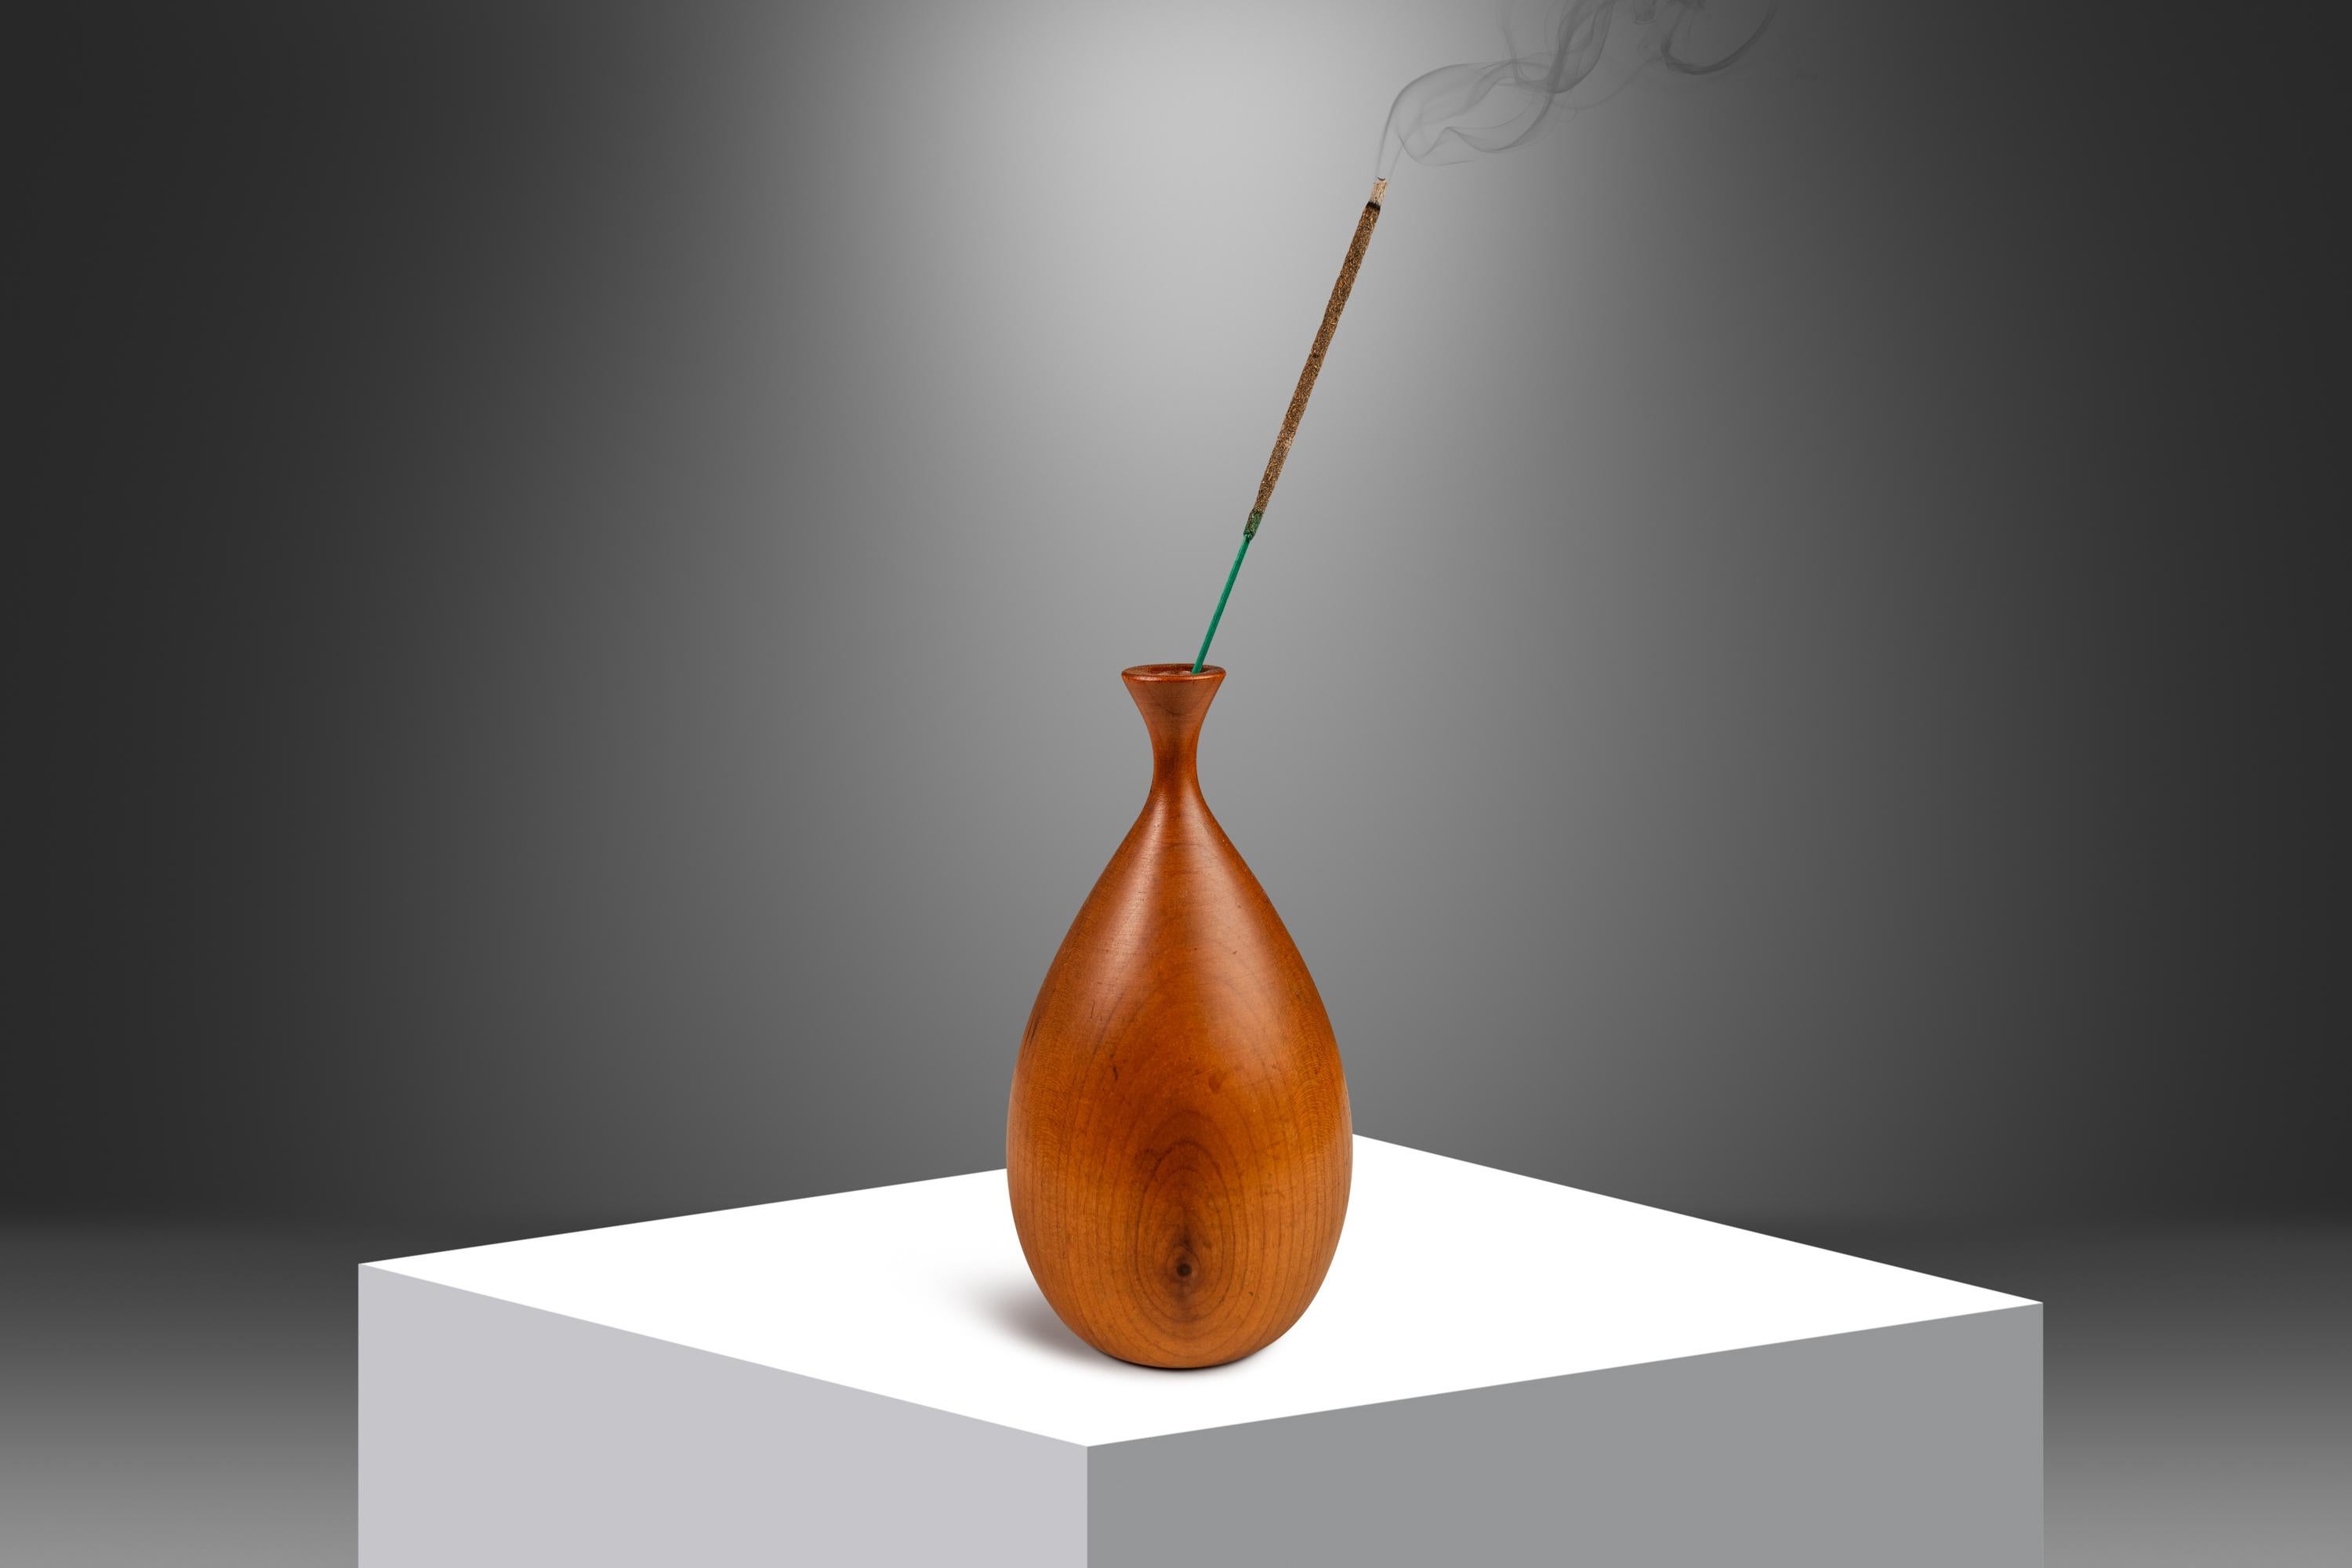 Introducing an expertly crafted and elegantly shaped minimalist vase hand-tooled by the well respected German-American wood worker George Biersdorf. Petite in size yet grand in shape this exquisite wood-turned vase, carved from solid walnut, is the